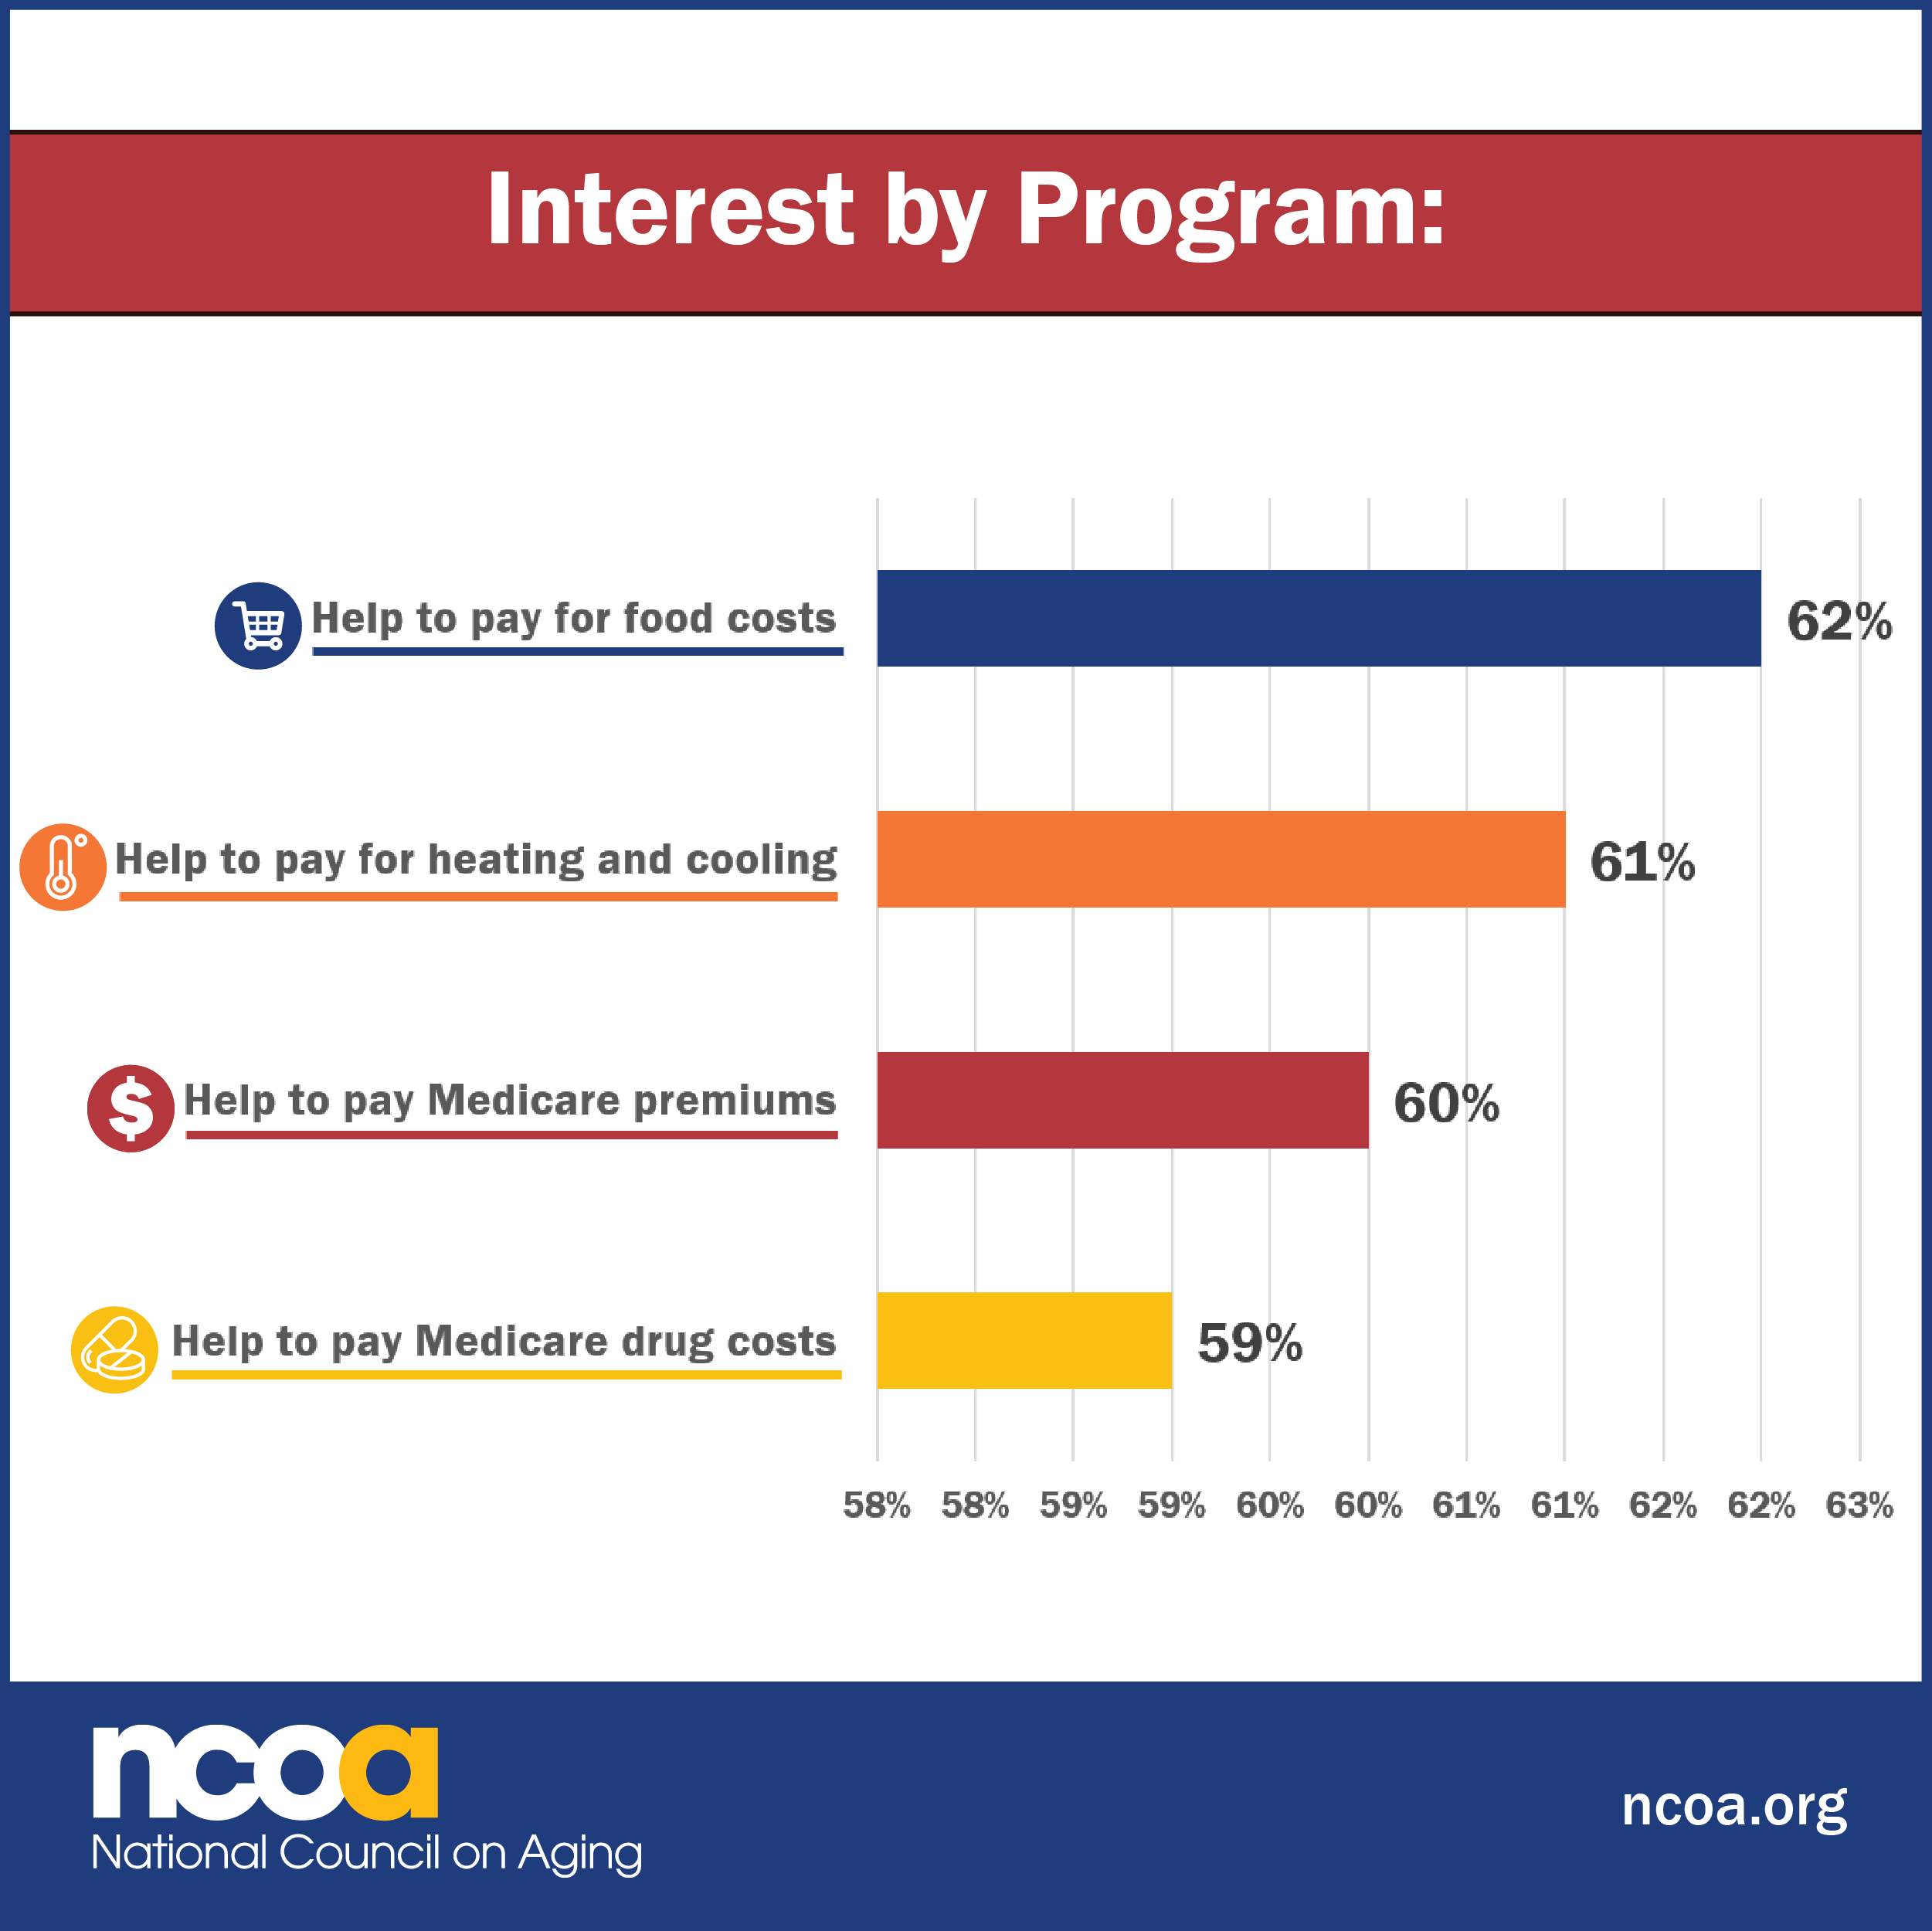 Infographic shows that many older adults are intereted in programs that cover their health care costs and food